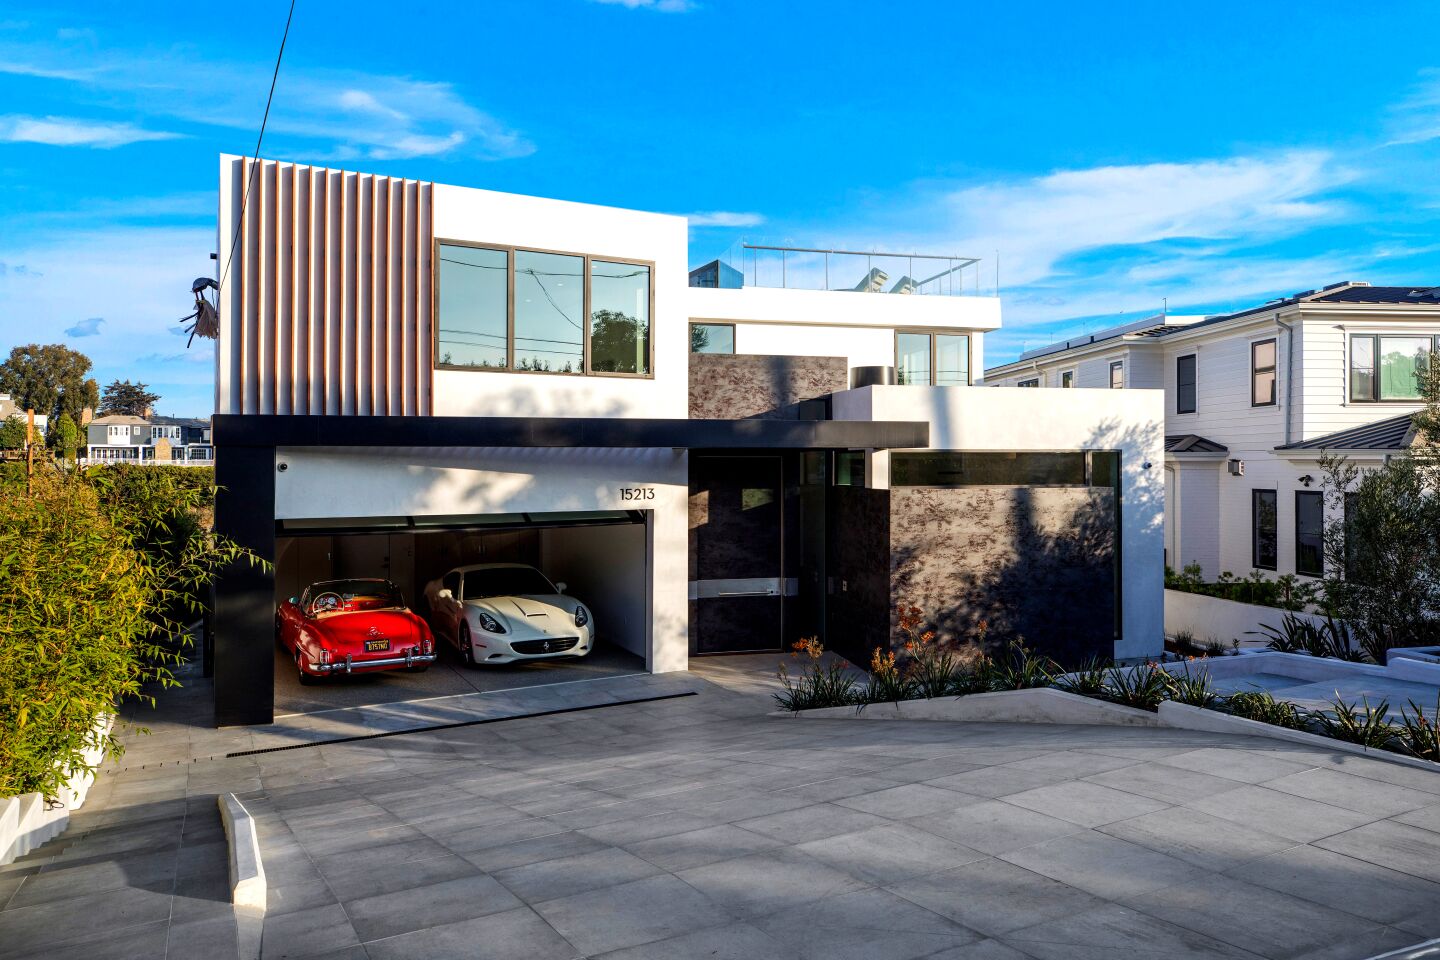 The modern exterior of the Palisades home